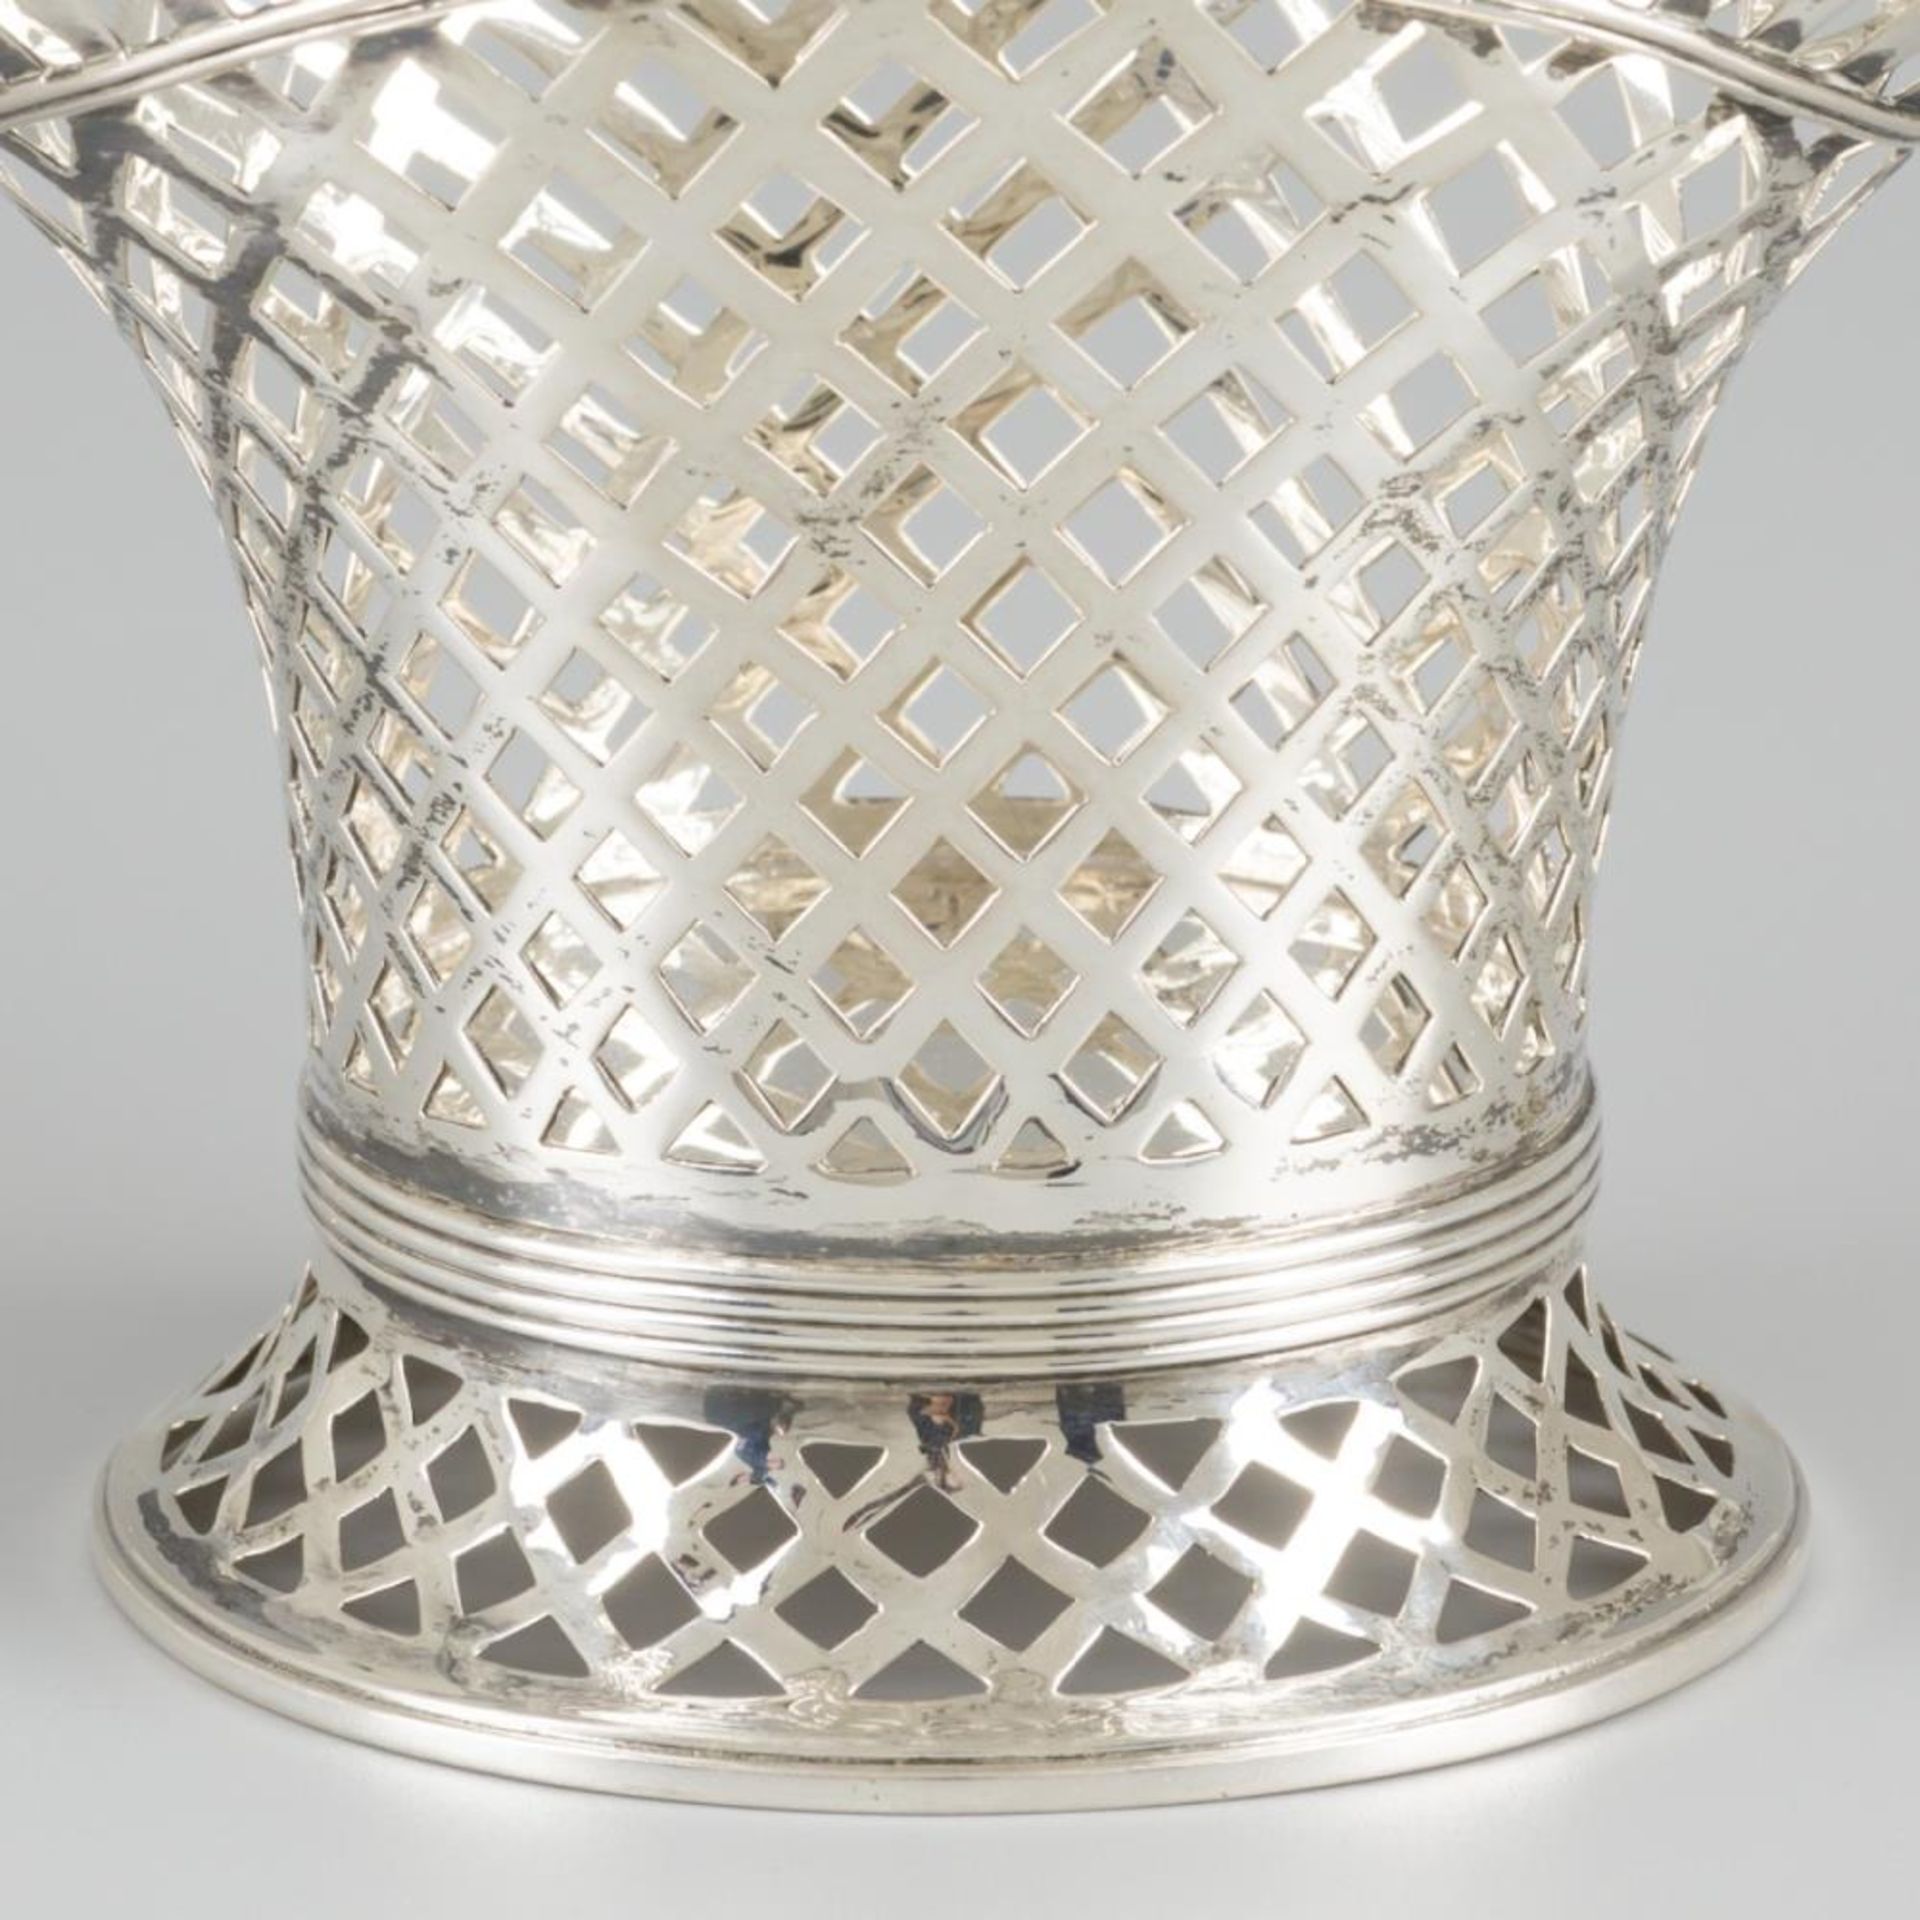 Decorative basket with silver handle. - Image 4 of 5